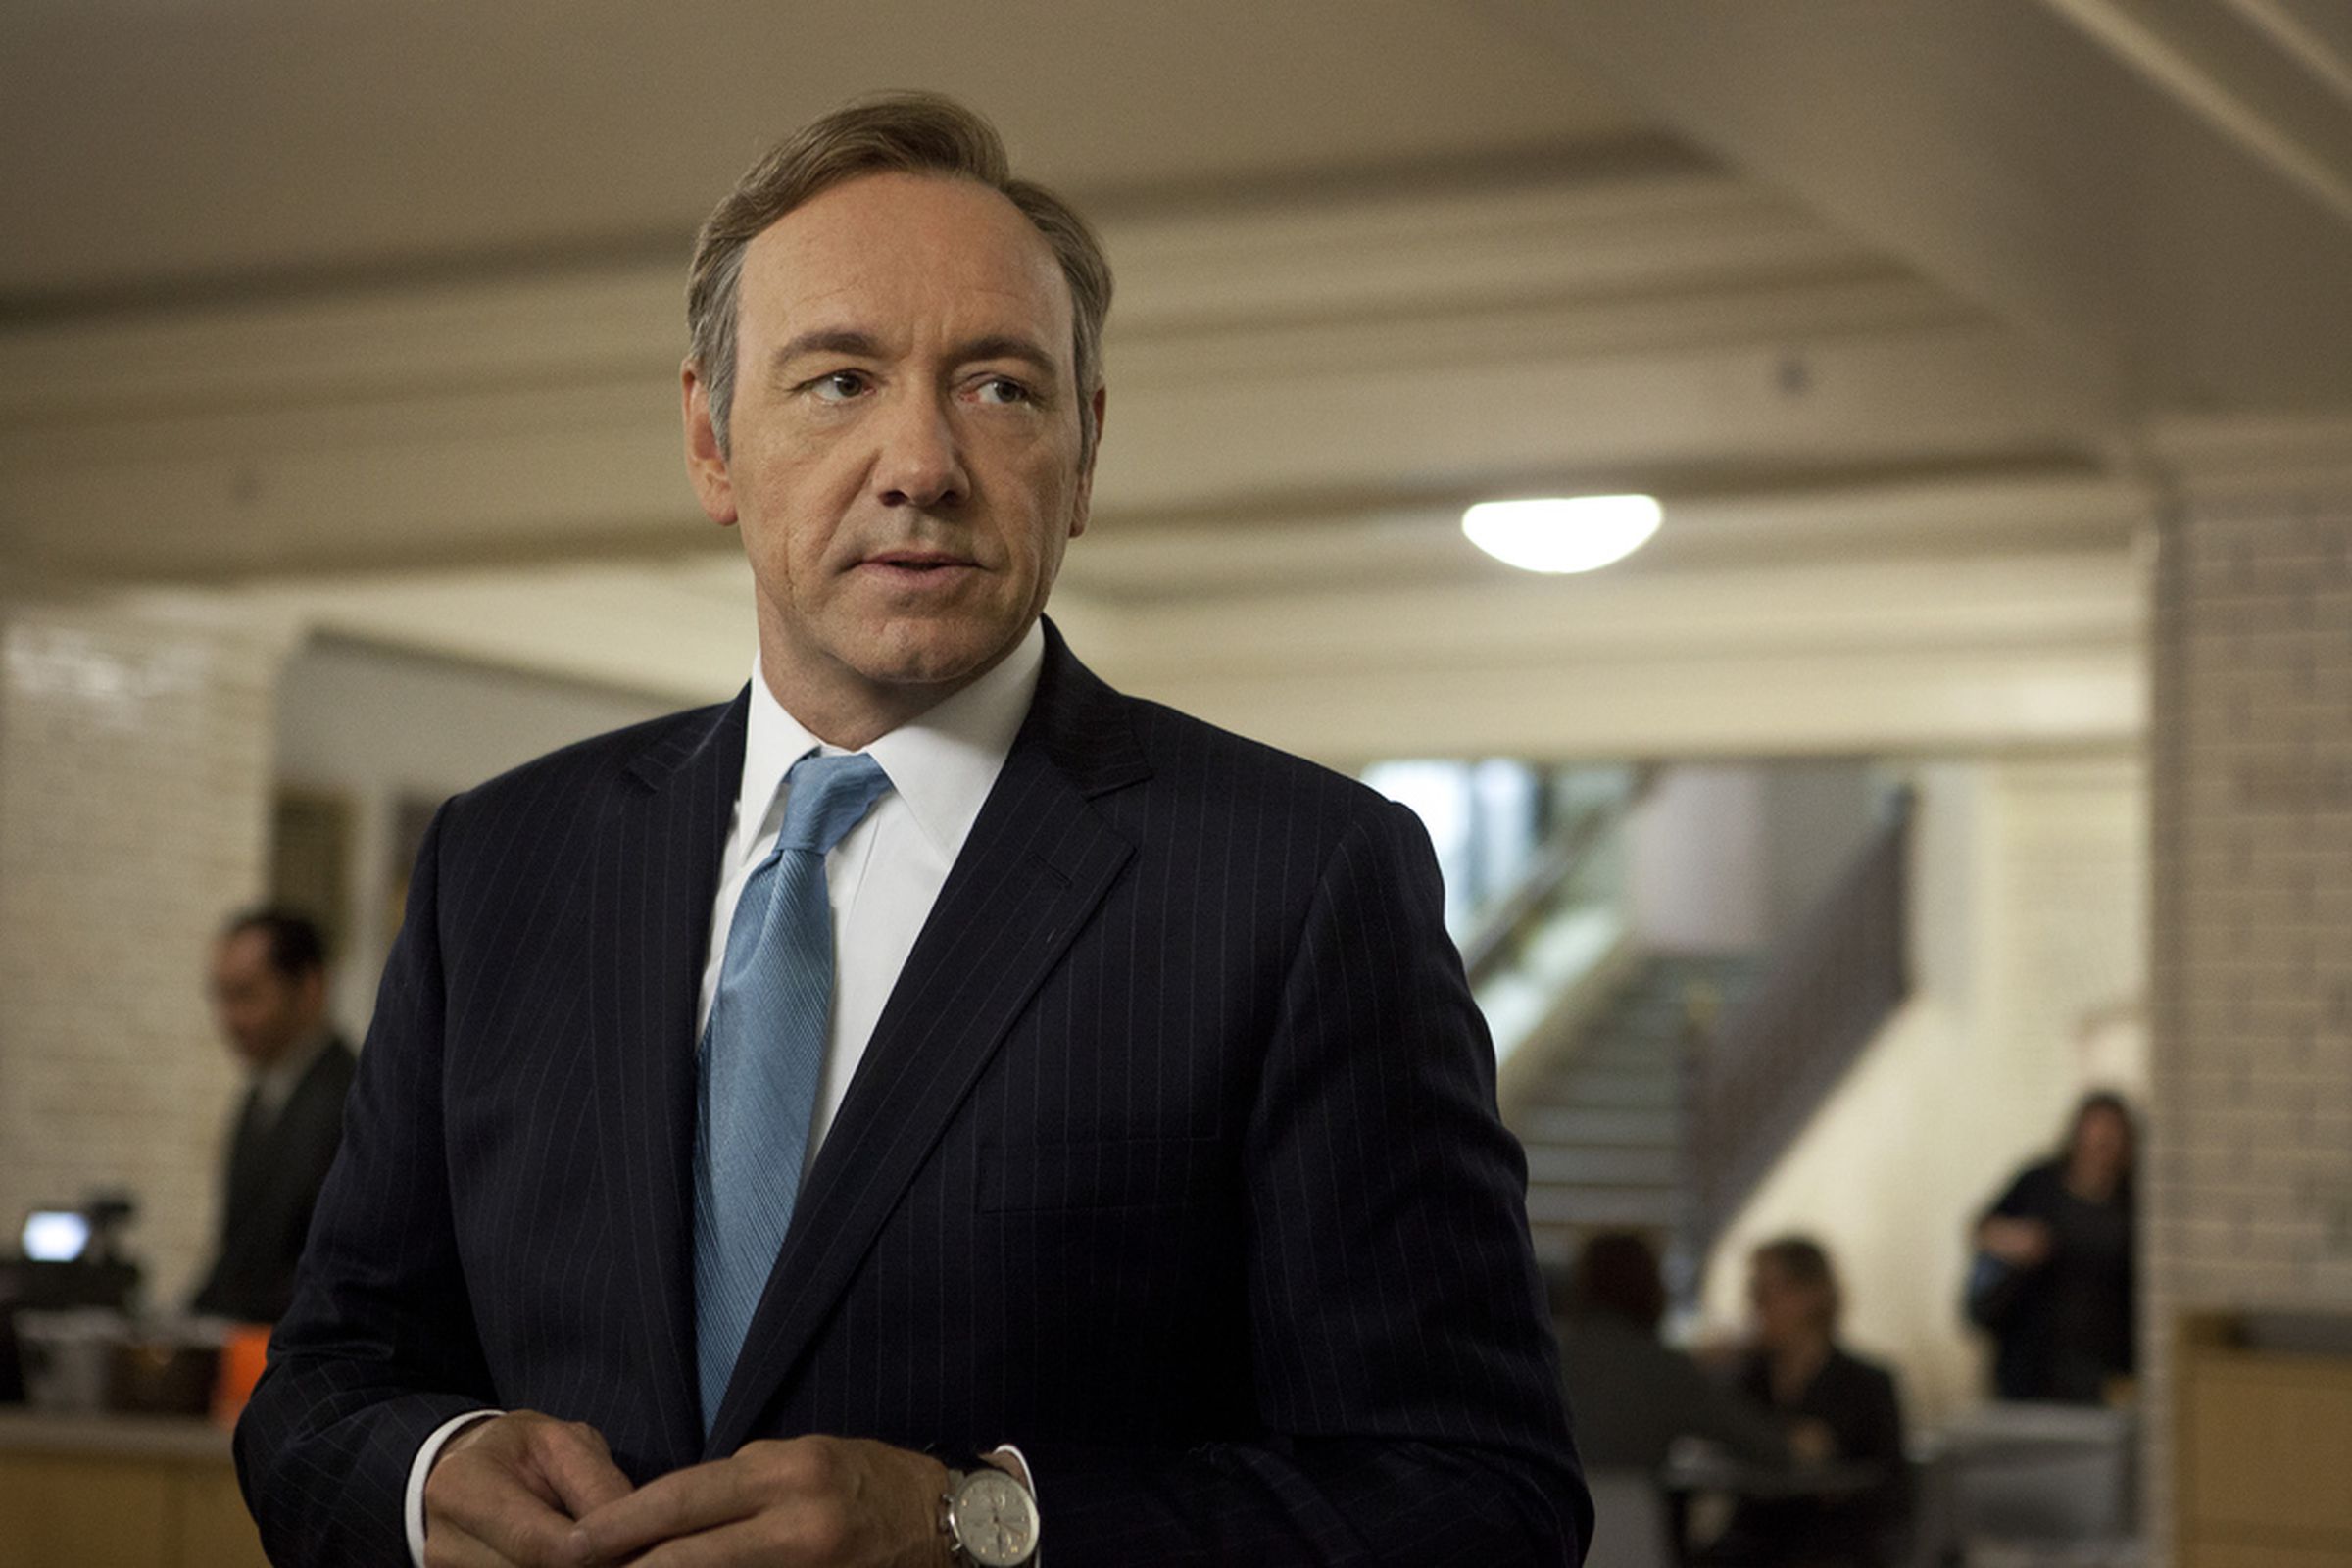 House of Cards stock 2 (credit Netflix in post)